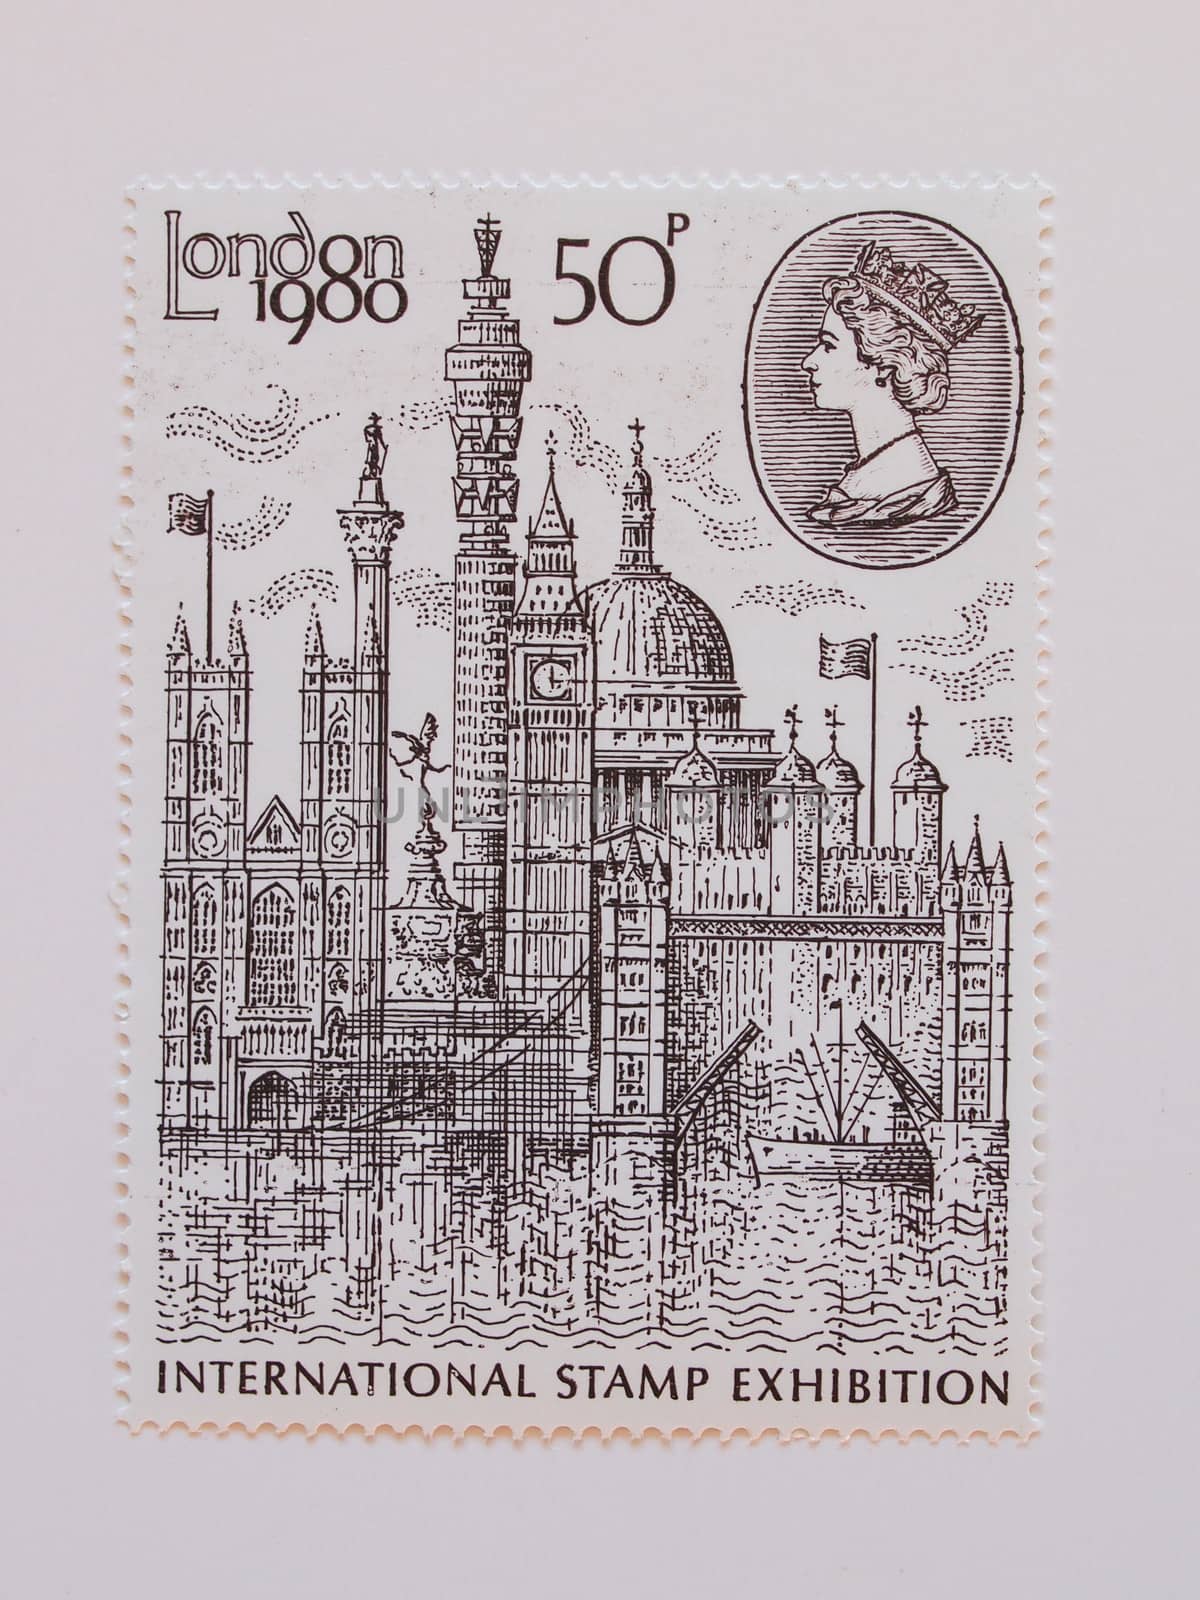 UK mail stamp 1977 - London landmarks by paolo77